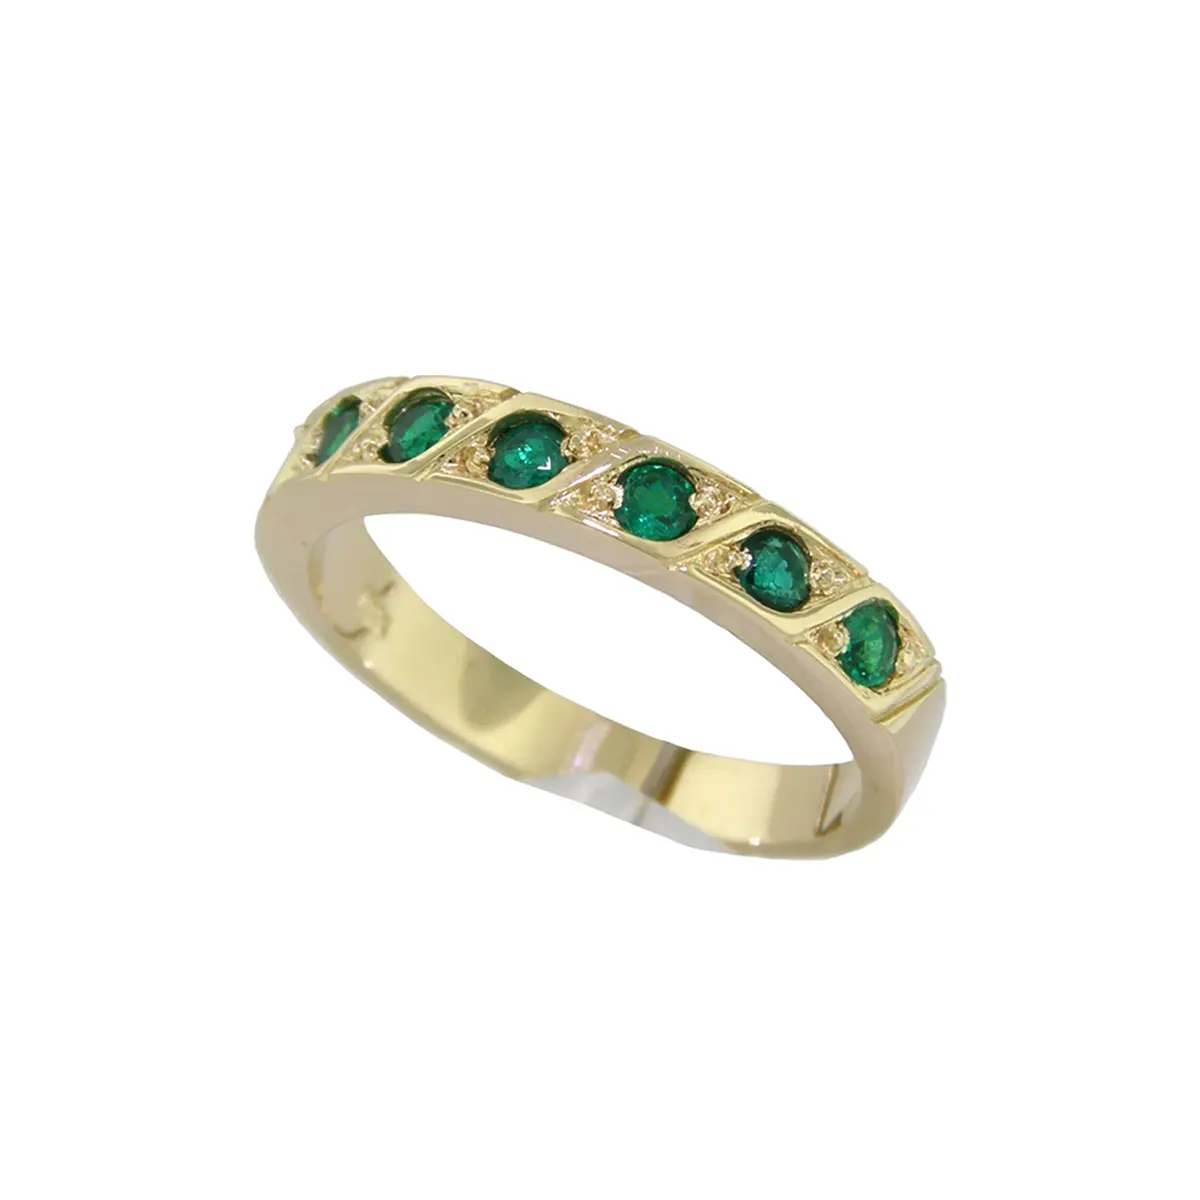 The band of the ring is smoothly polished and has a comfortable fit, designed to be worn every day. It features a timeless design that highlights the emeralds.